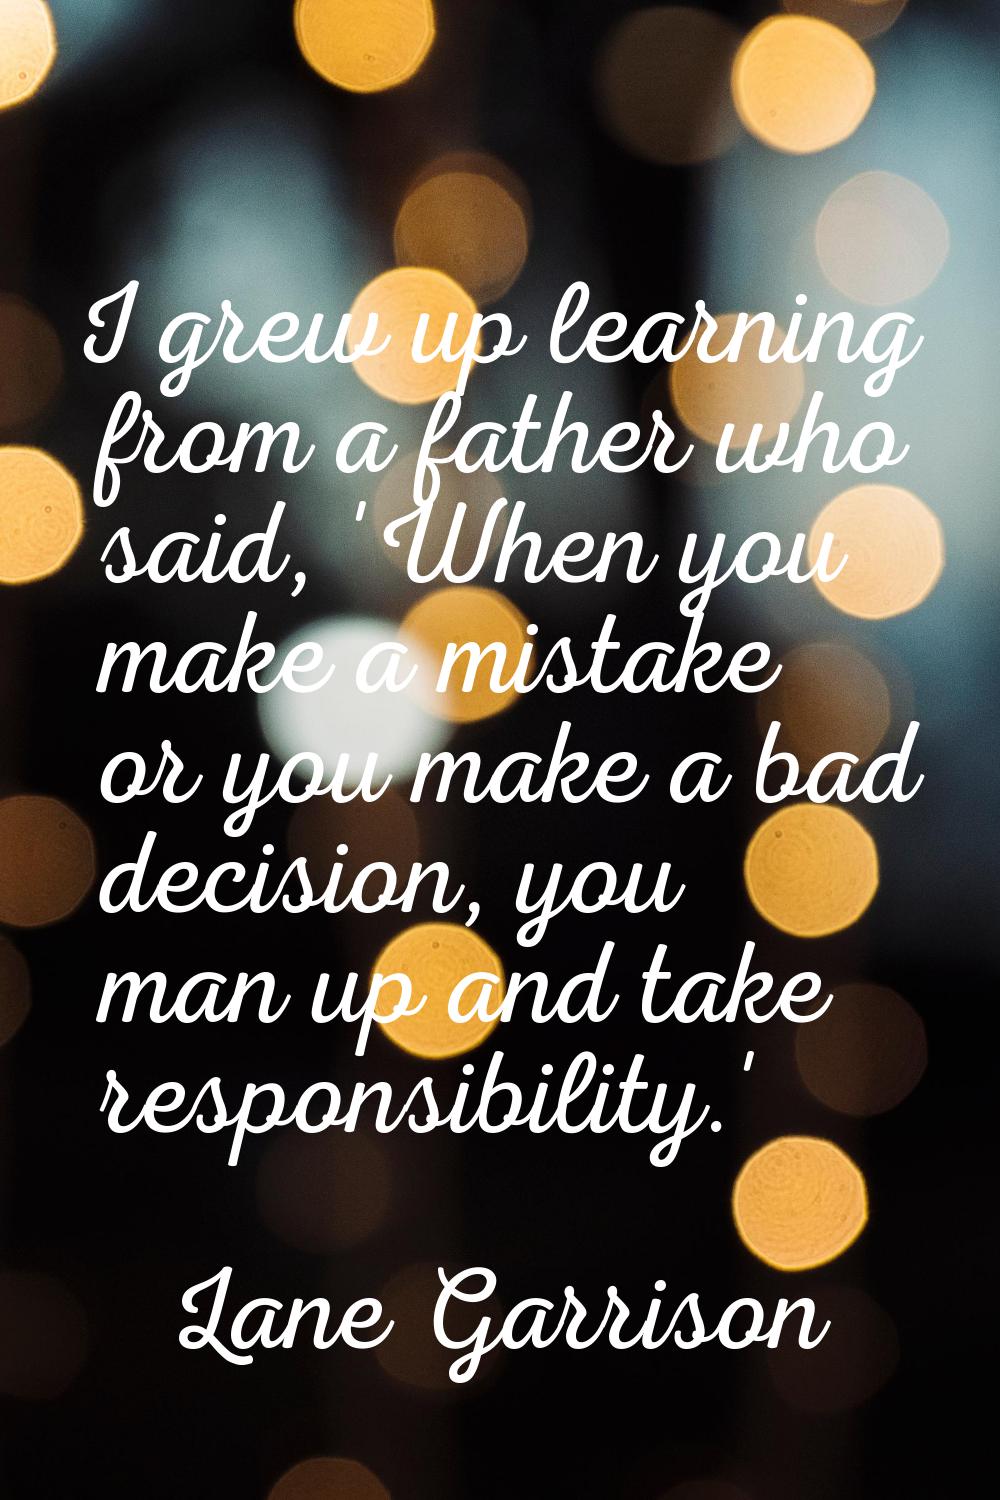 I grew up learning from a father who said, 'When you make a mistake or you make a bad decision, you